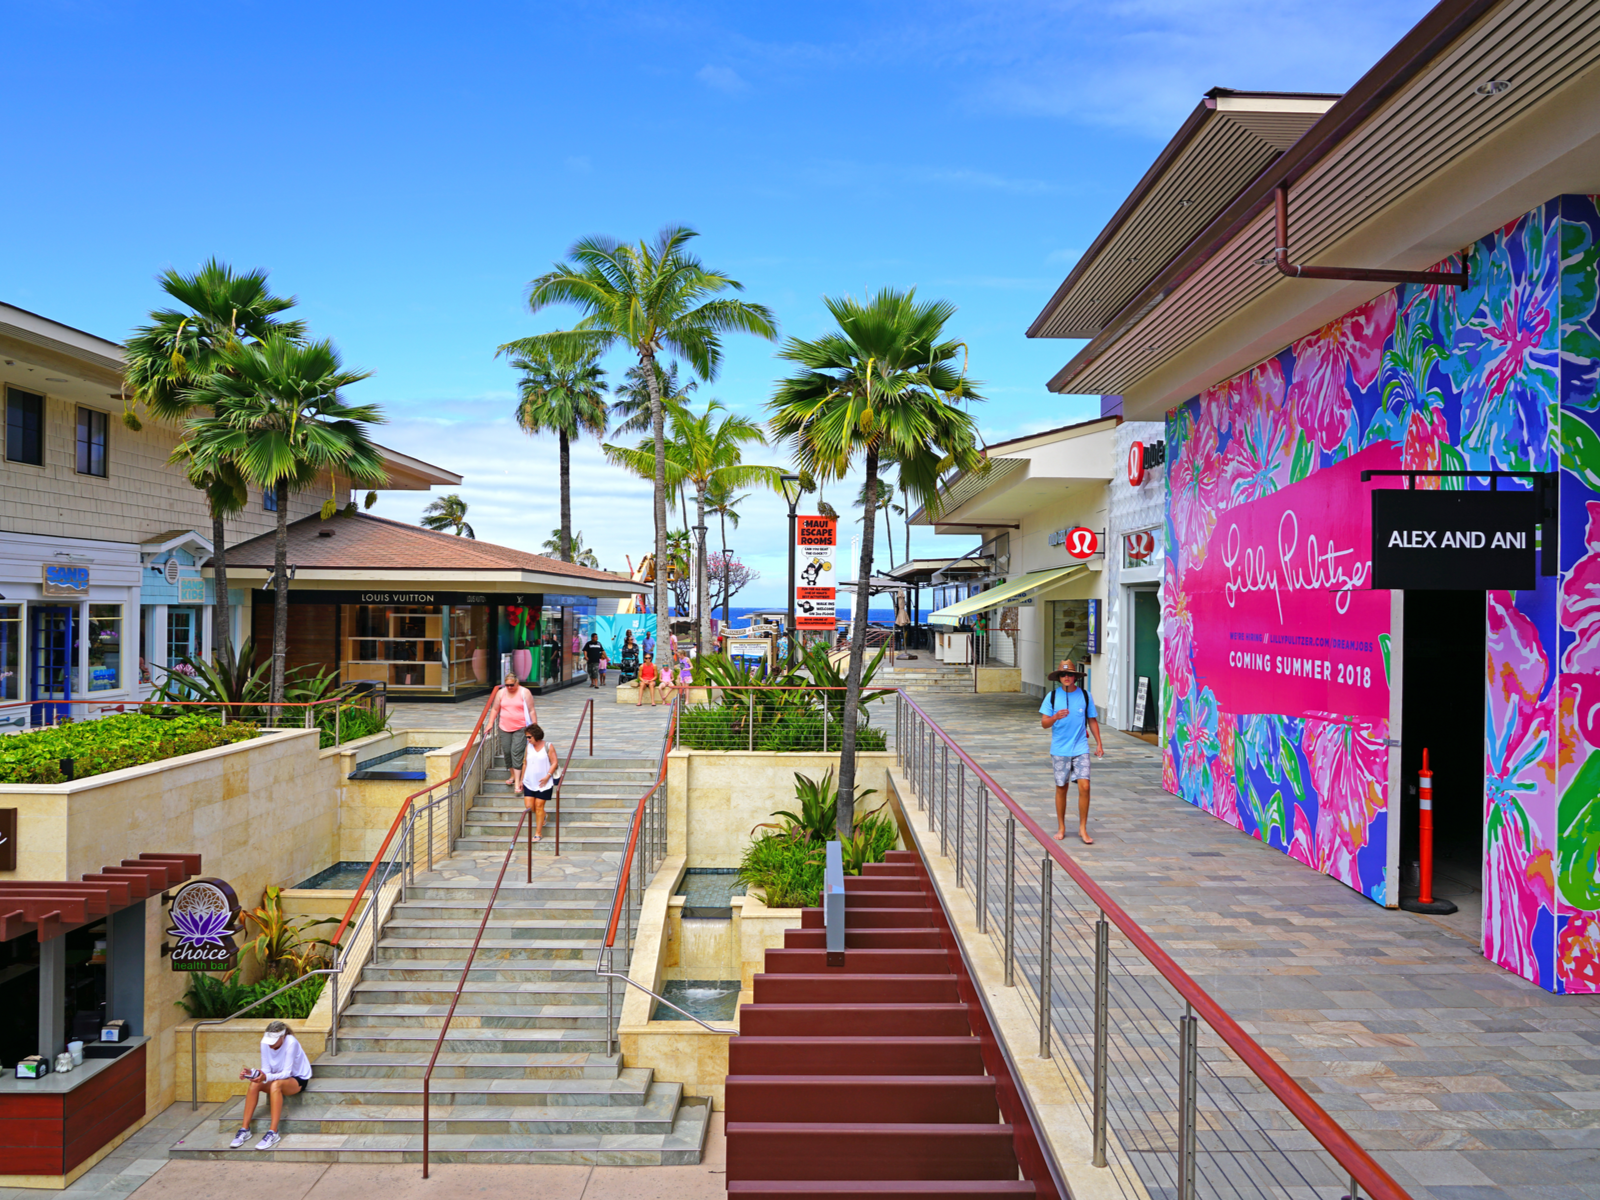 A shopping center in Kaanapali, near some of the best hotels in Maui